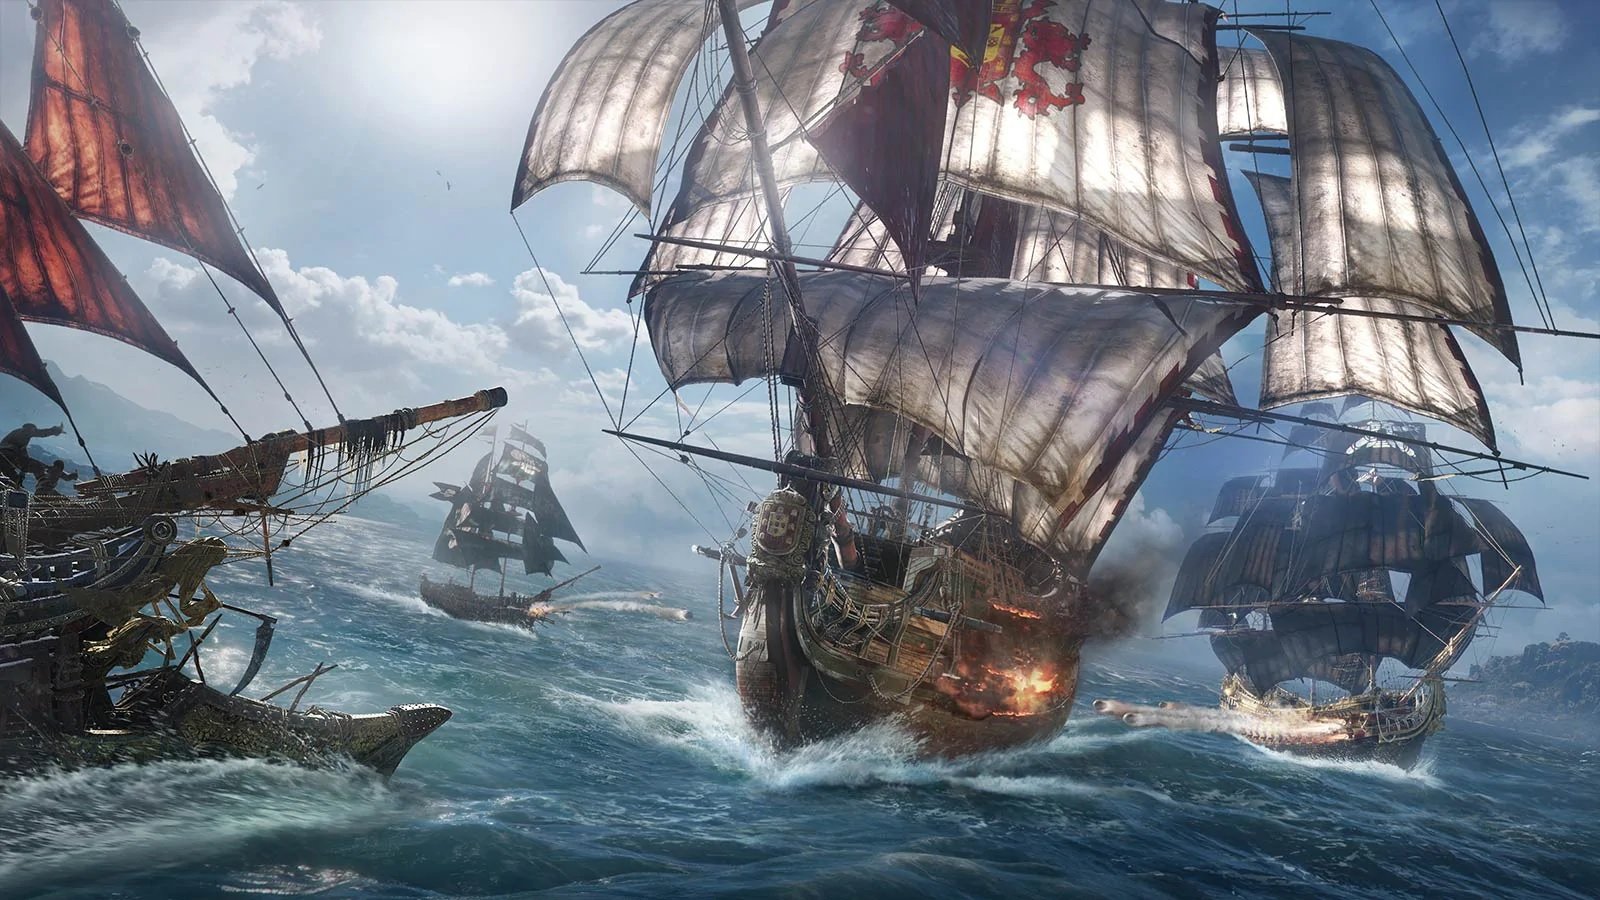 Skull & Bones is being developed as a "Multiplayer First" game